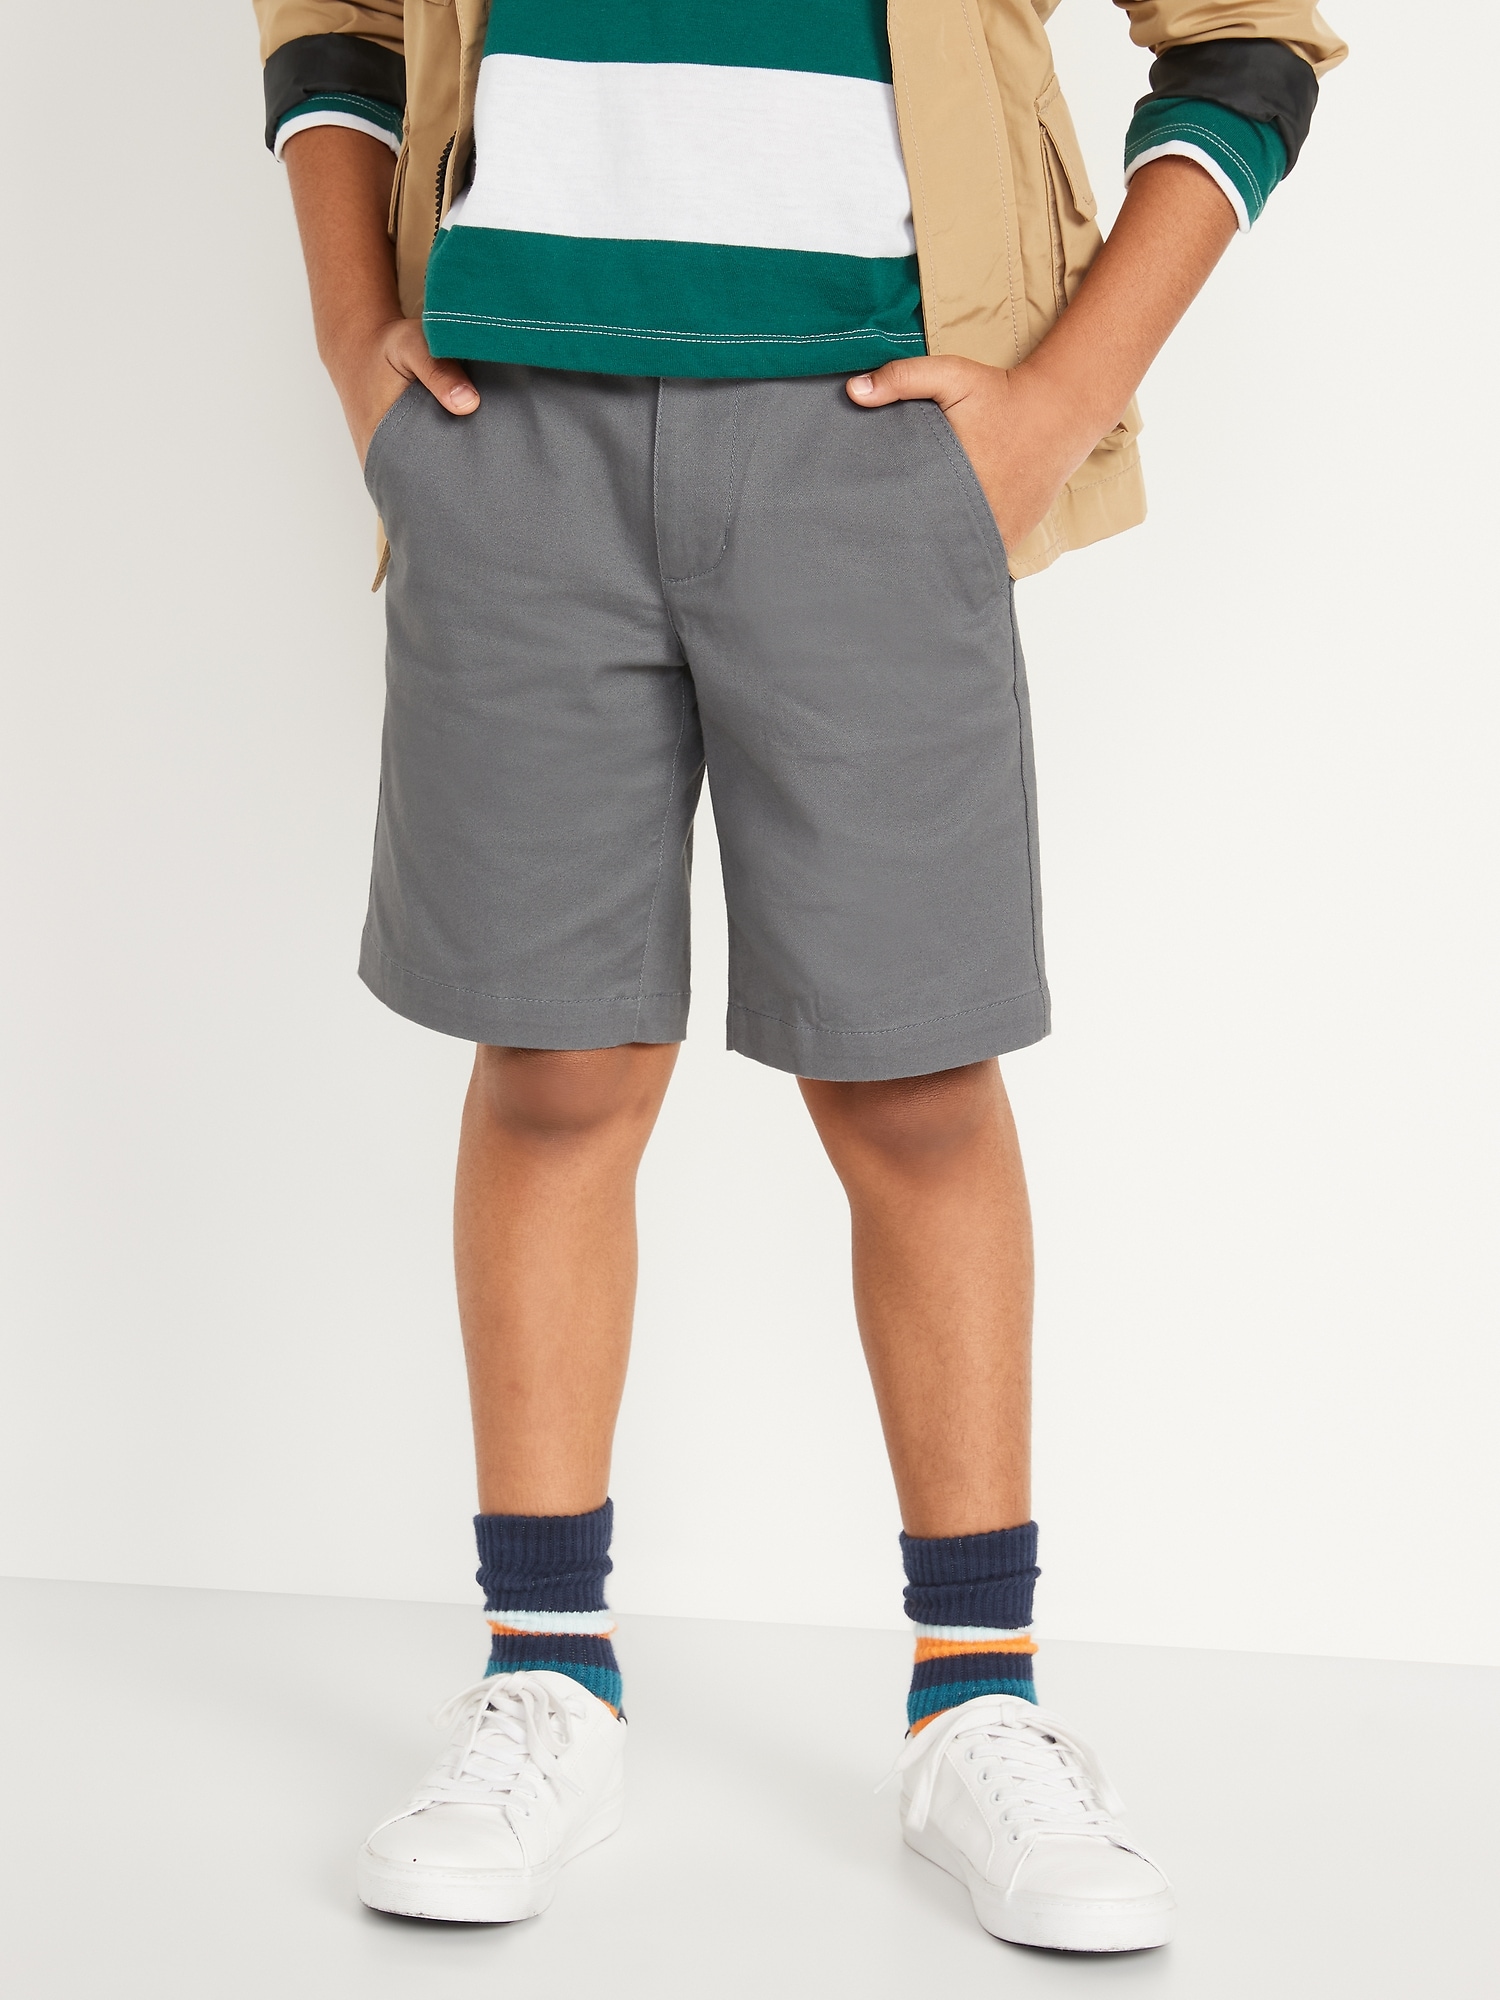 Old Navy Built-In Flex Straight Twill Shorts for Boys (Above Knee